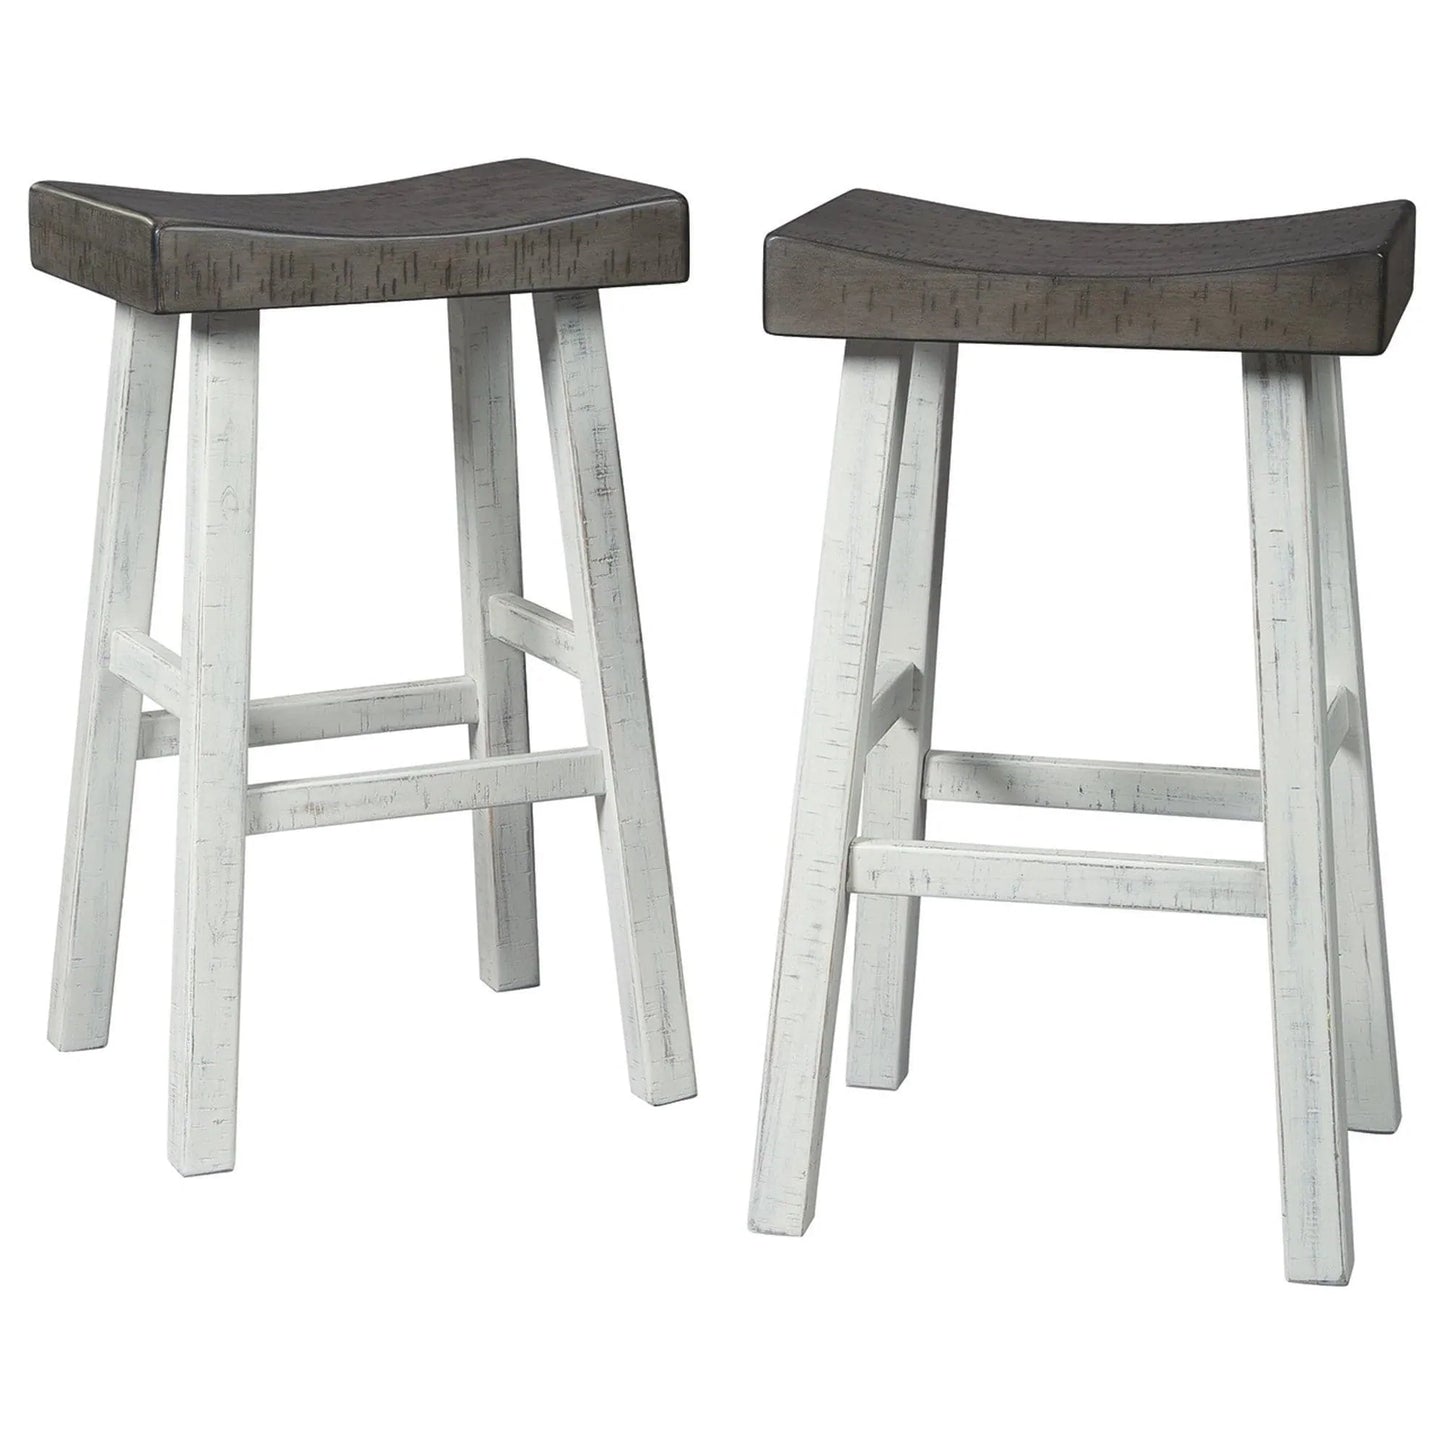 Benjara 31 H x 13 W x 18 L Inches / Brown, White 31 Inch Wooden Saddle Stool with Angular Legs, Set of 2, Brown and White - BM227038